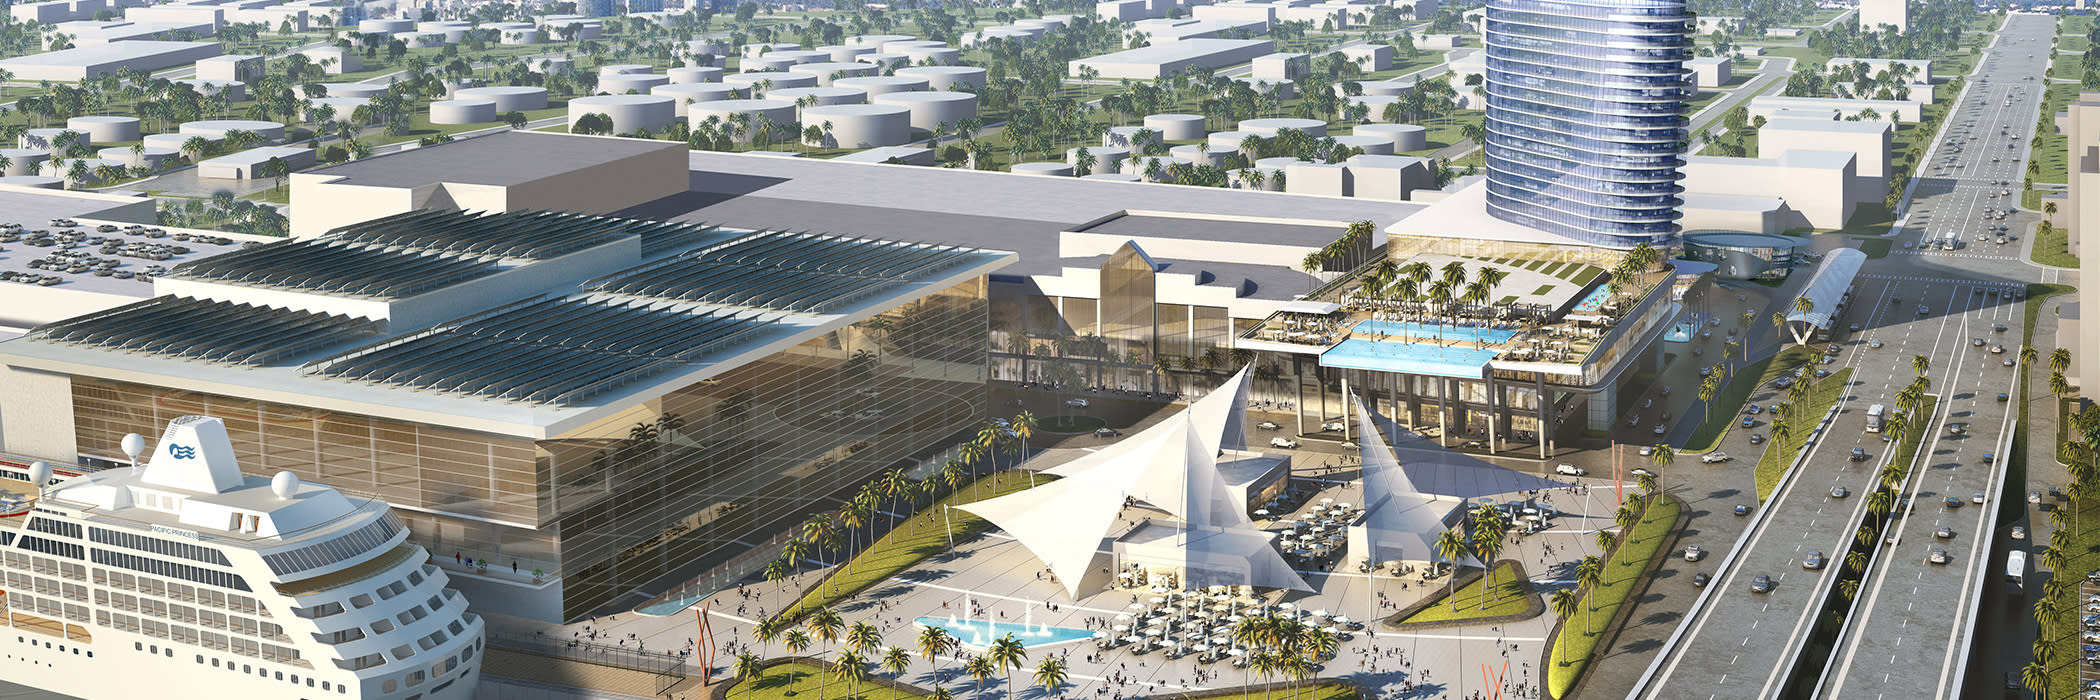 Broward County Convention Center Expansion